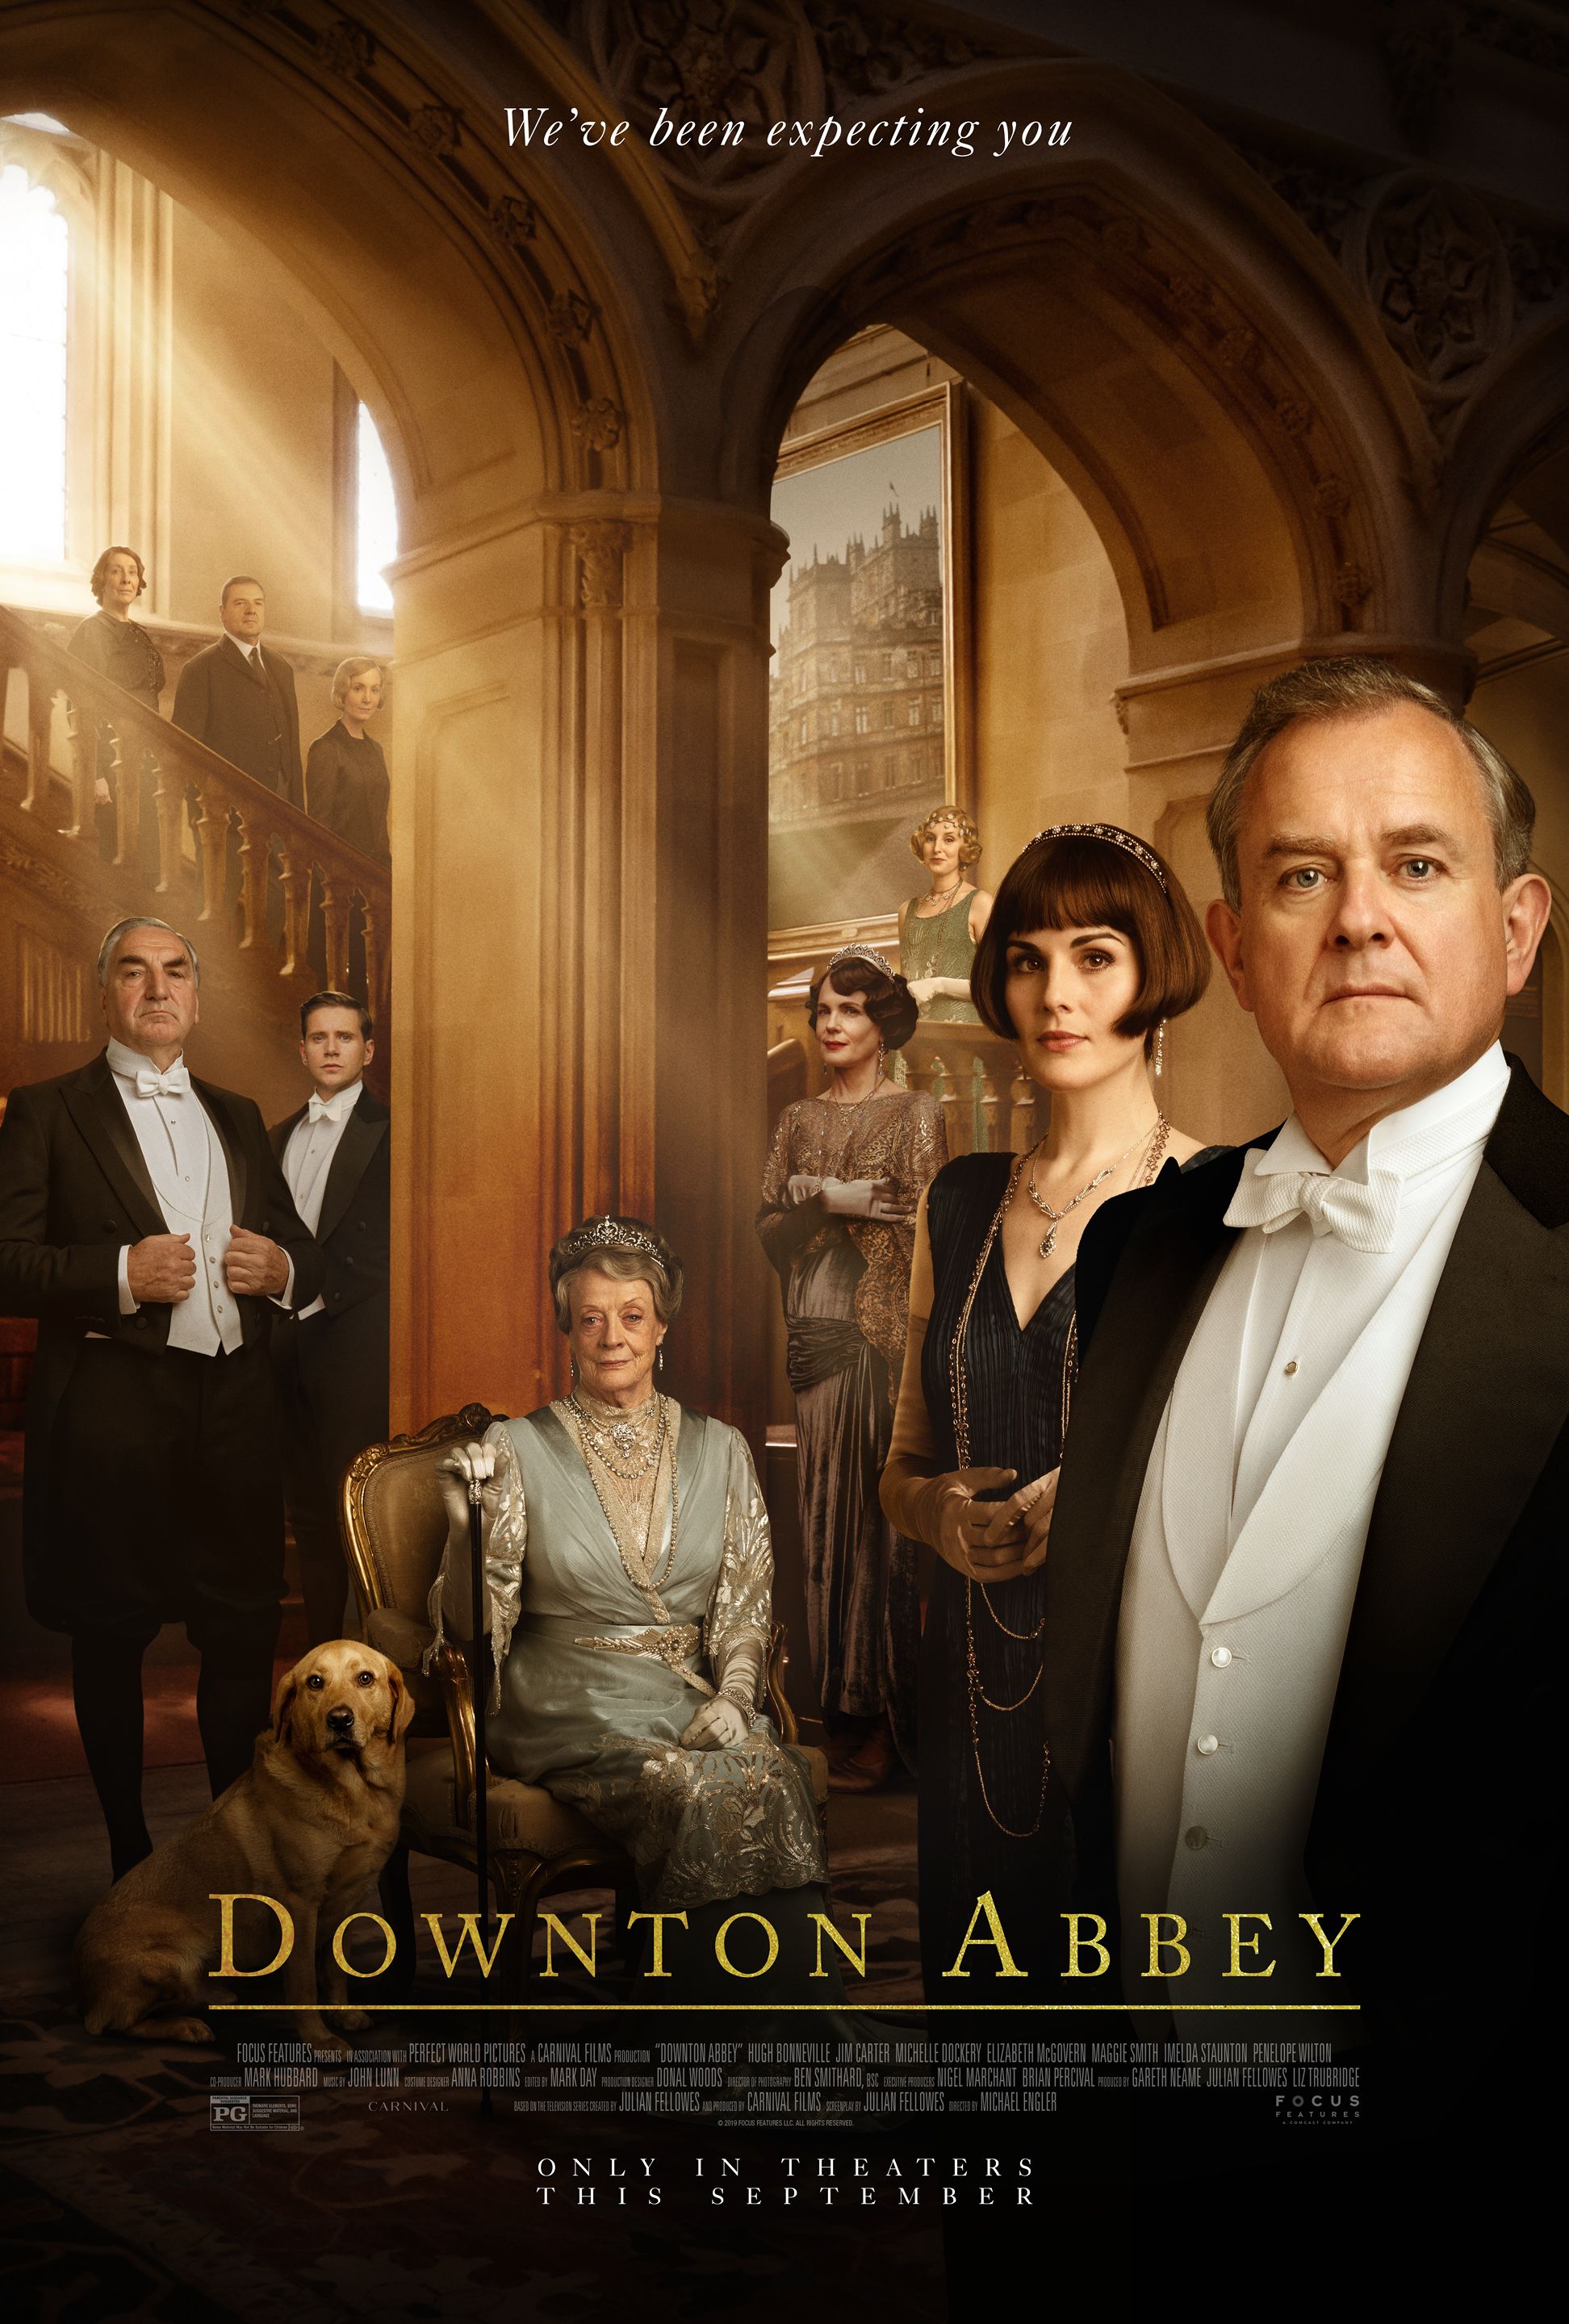 Watch the Downton Abbey Movie Trailer, Starring Maggie Smith, Michelle Dockery and Hugh Bonneville